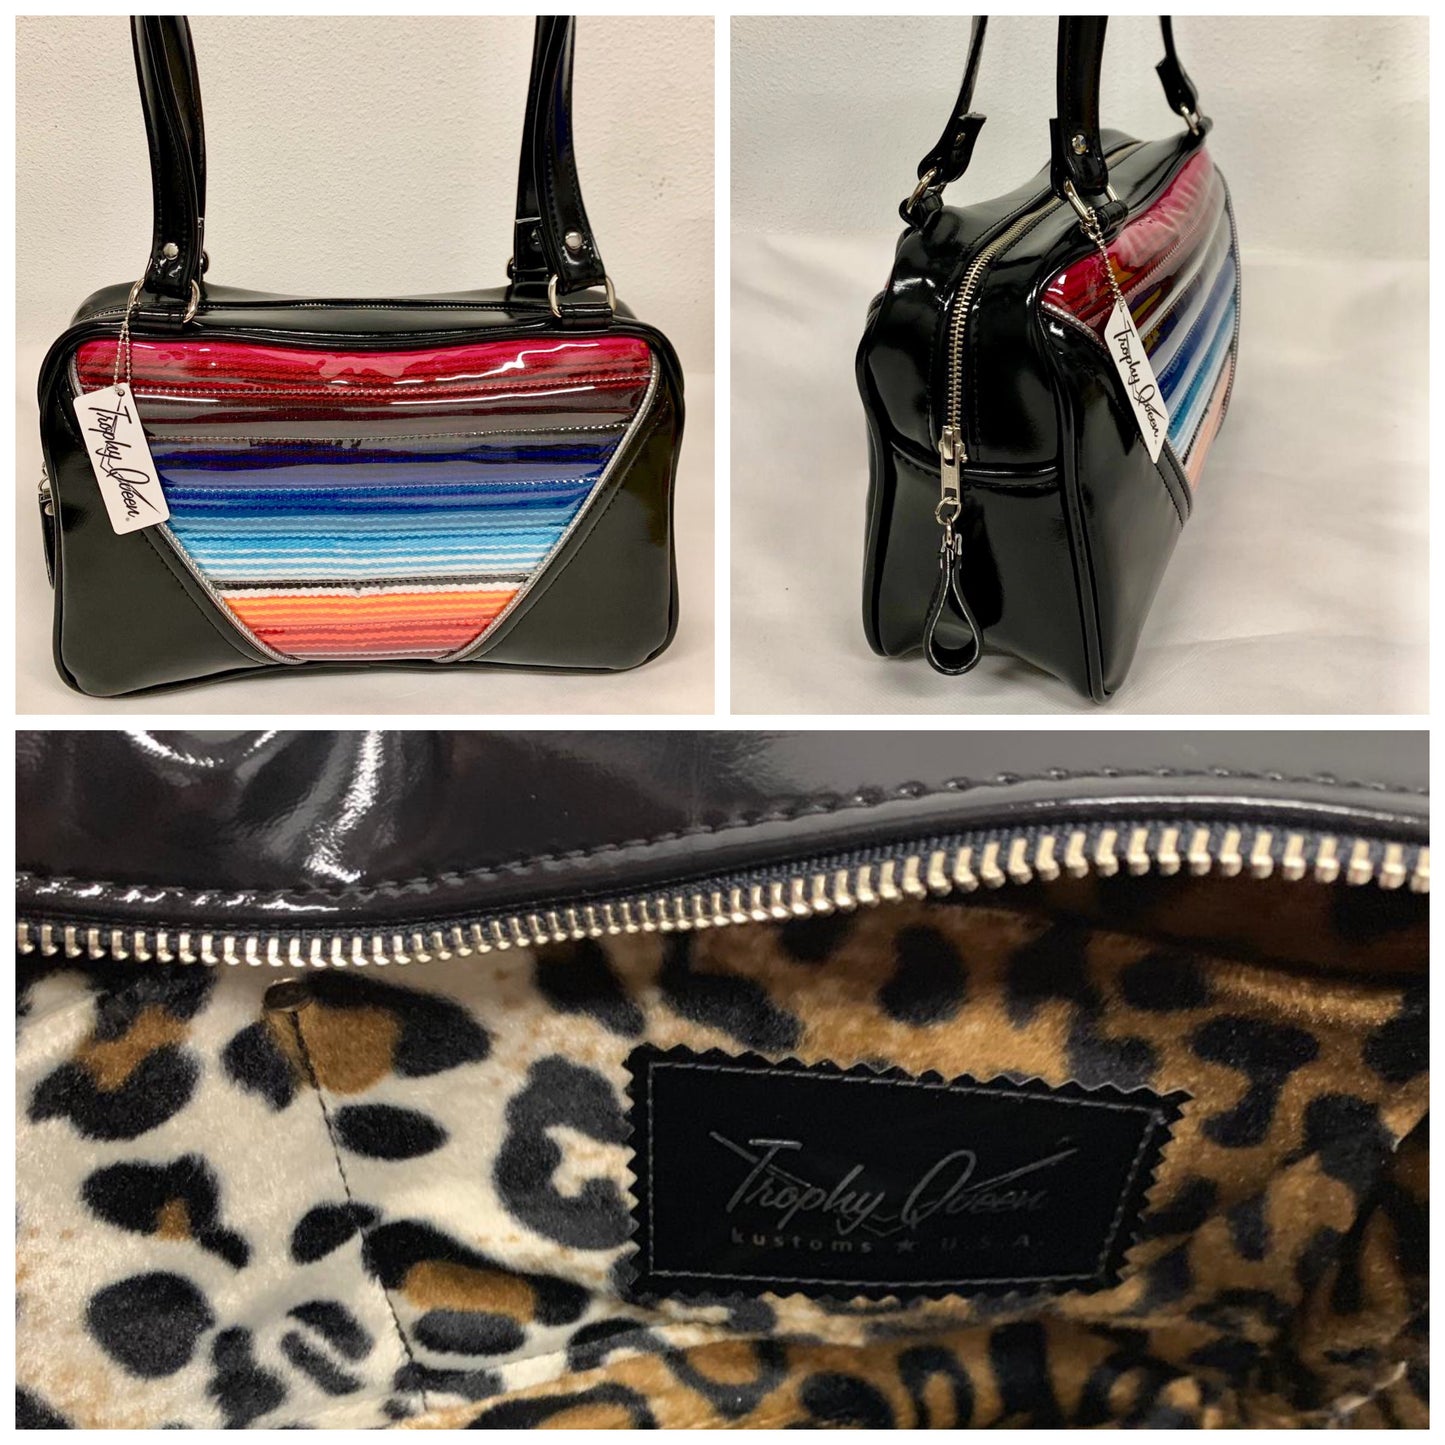 Comet Tote in Mexican blanket with clear overlay and grease black vinyl with plush leopard lining handcrafted in California with nickel hardware, an extra set of straps, vinyl zipper pull, inside open divided pocket, zipper pocket with serial number inside and signature Trophy Queen label.